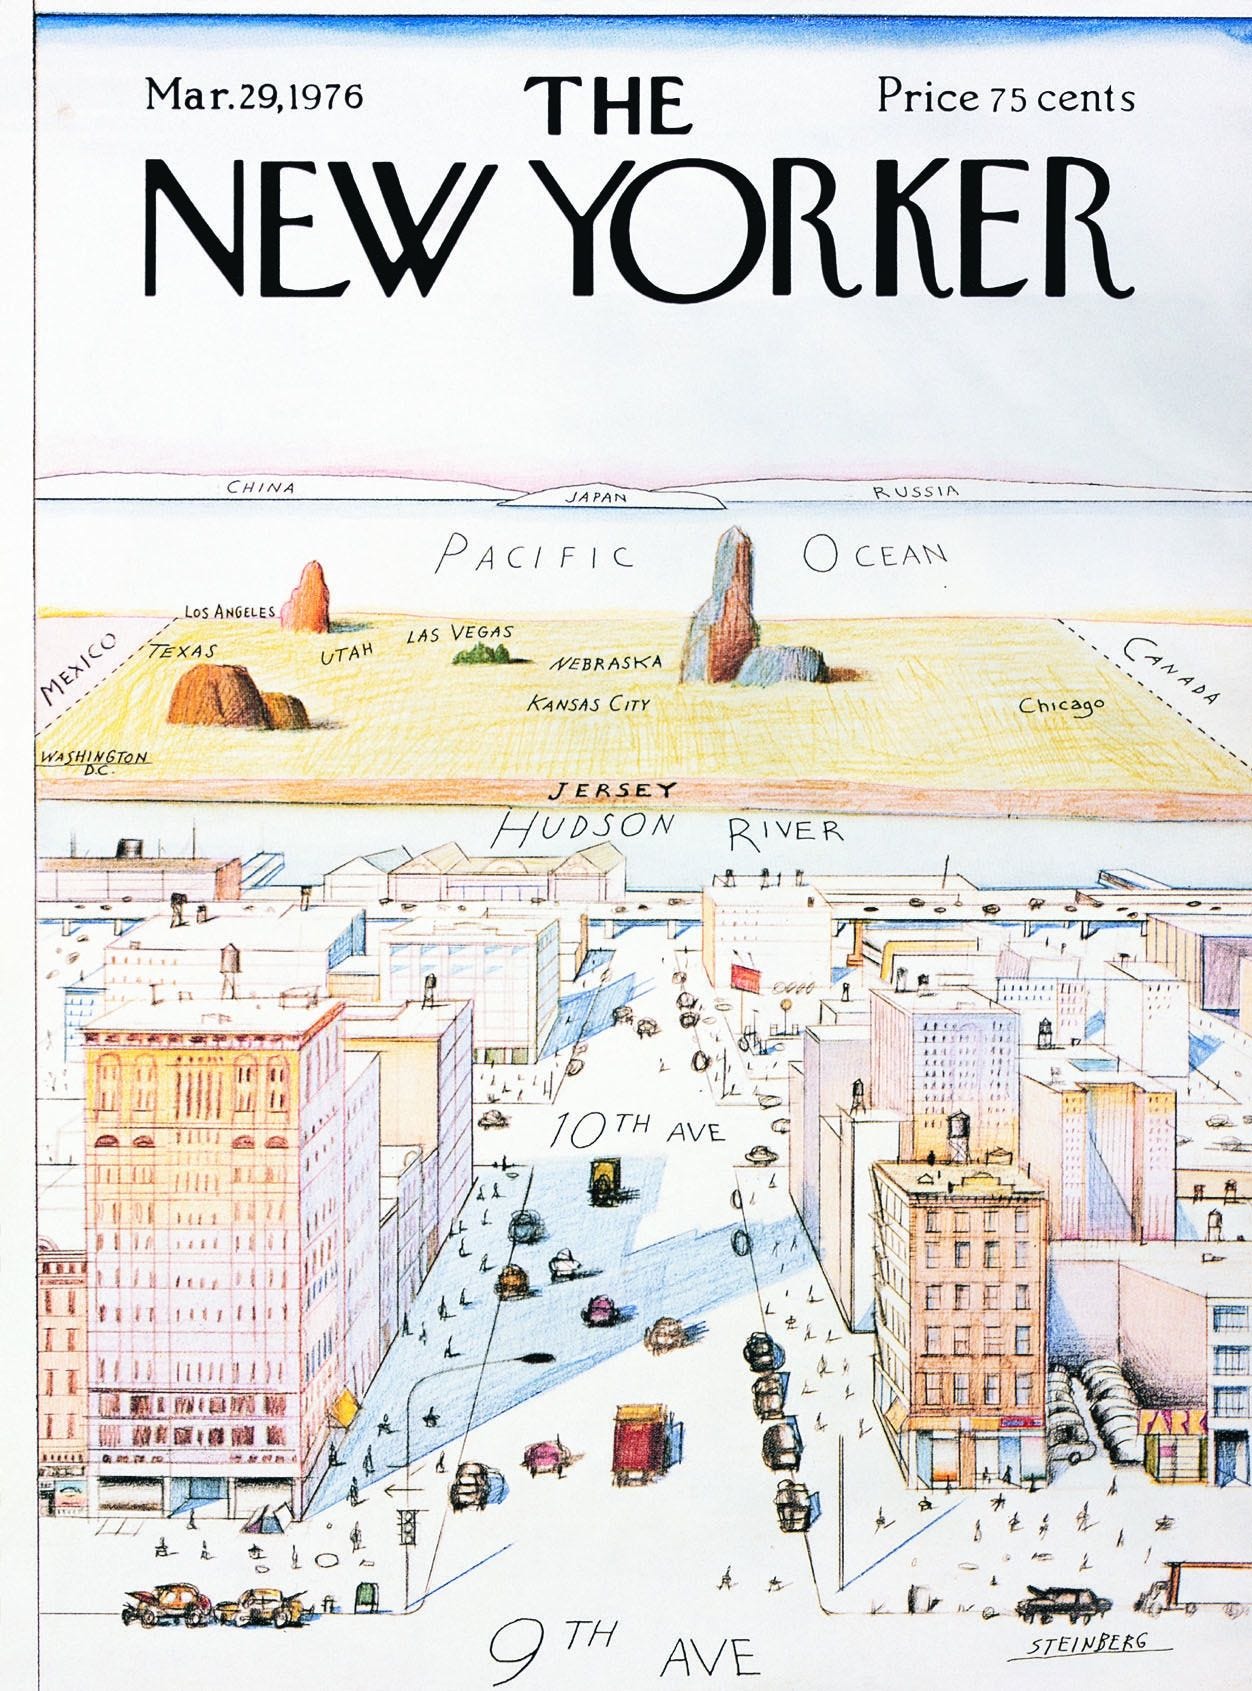 20 Iconic New Yorker Covers ‹ Literary Hub